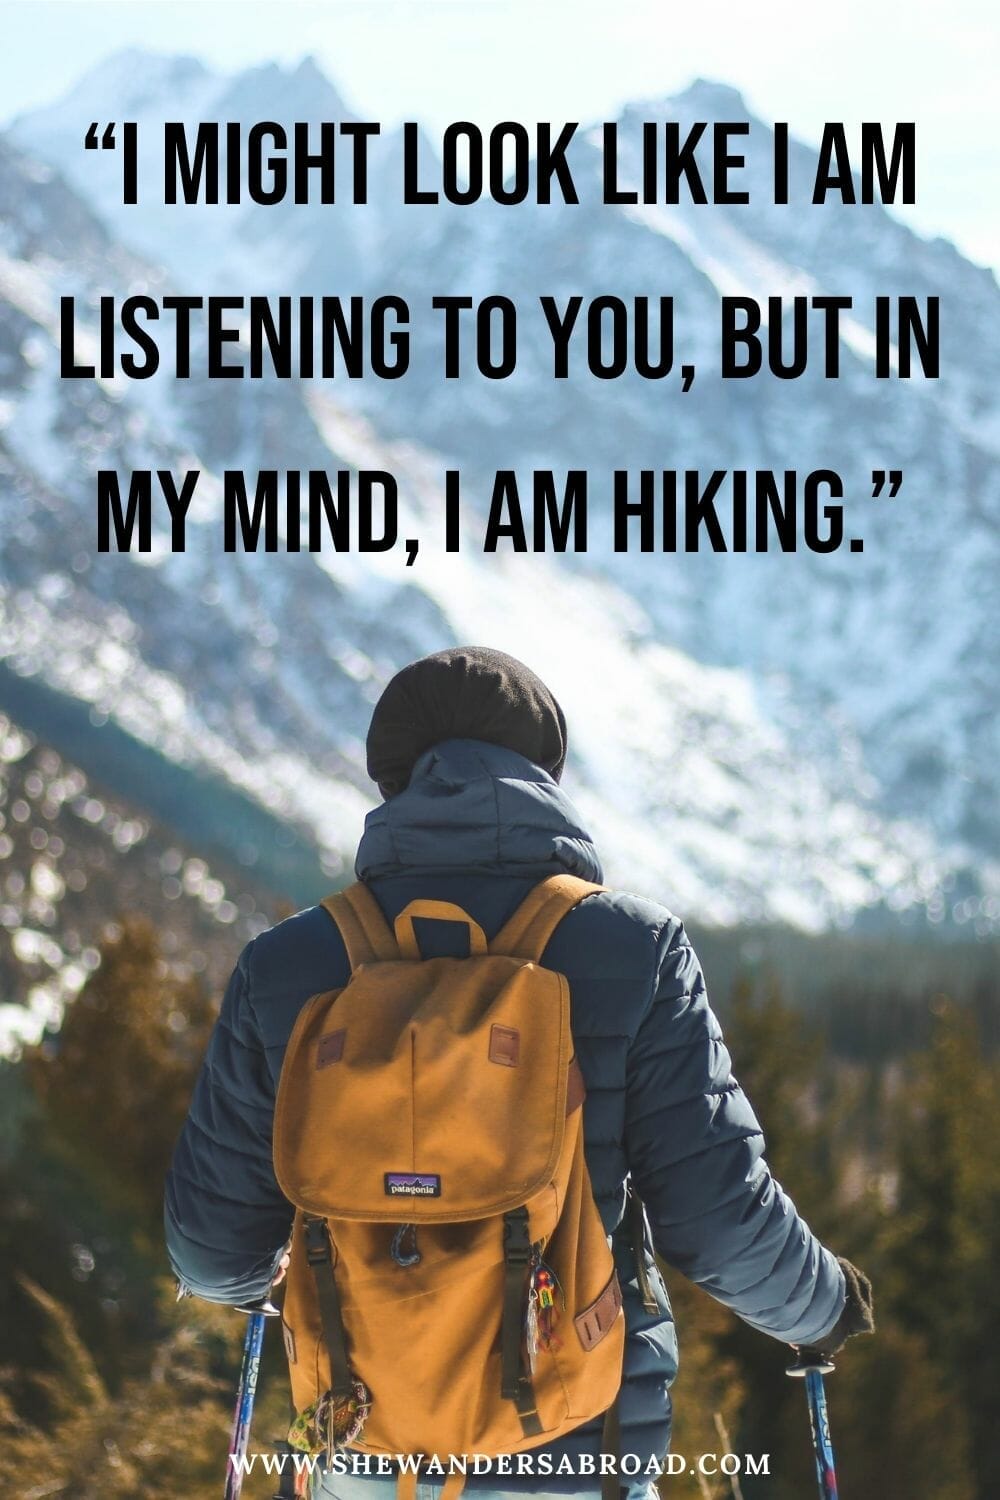 Funny hiking captions for Instagram